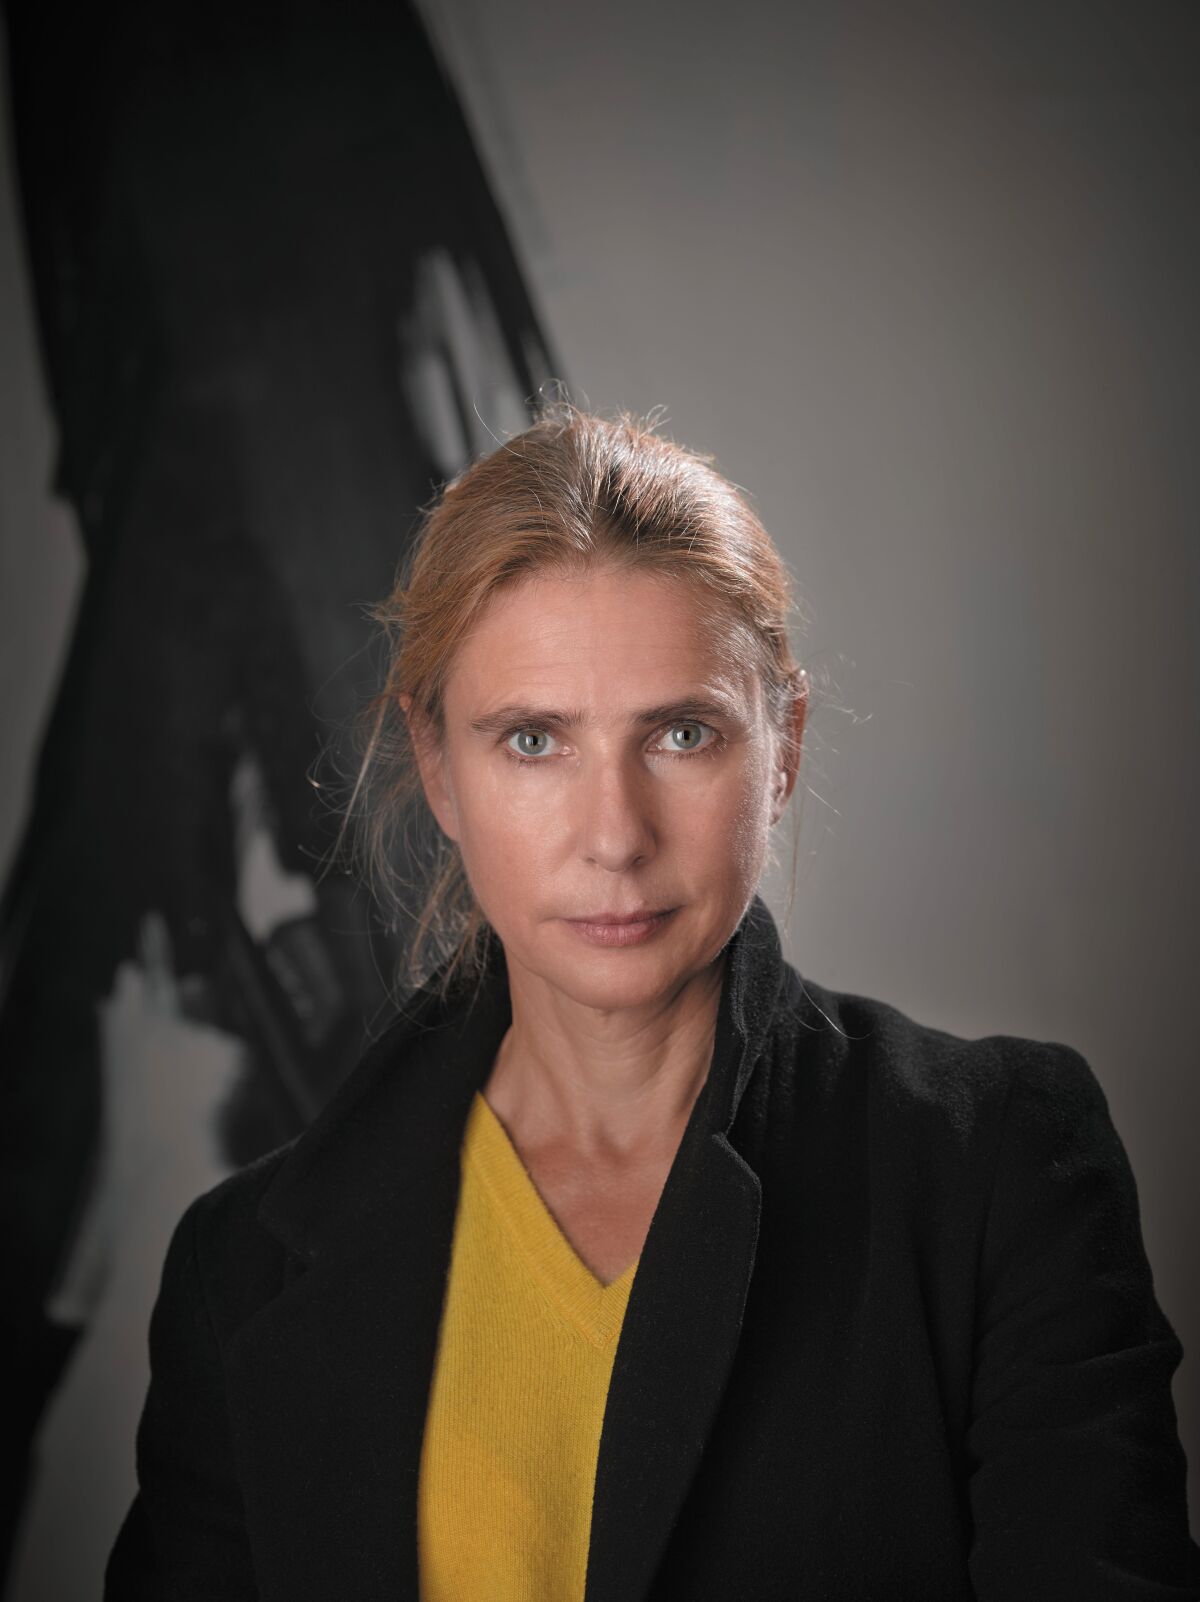 Warwick’s bookstore presents author Lionel Shriver at 4 p.m. Tuesday, June 15, online.